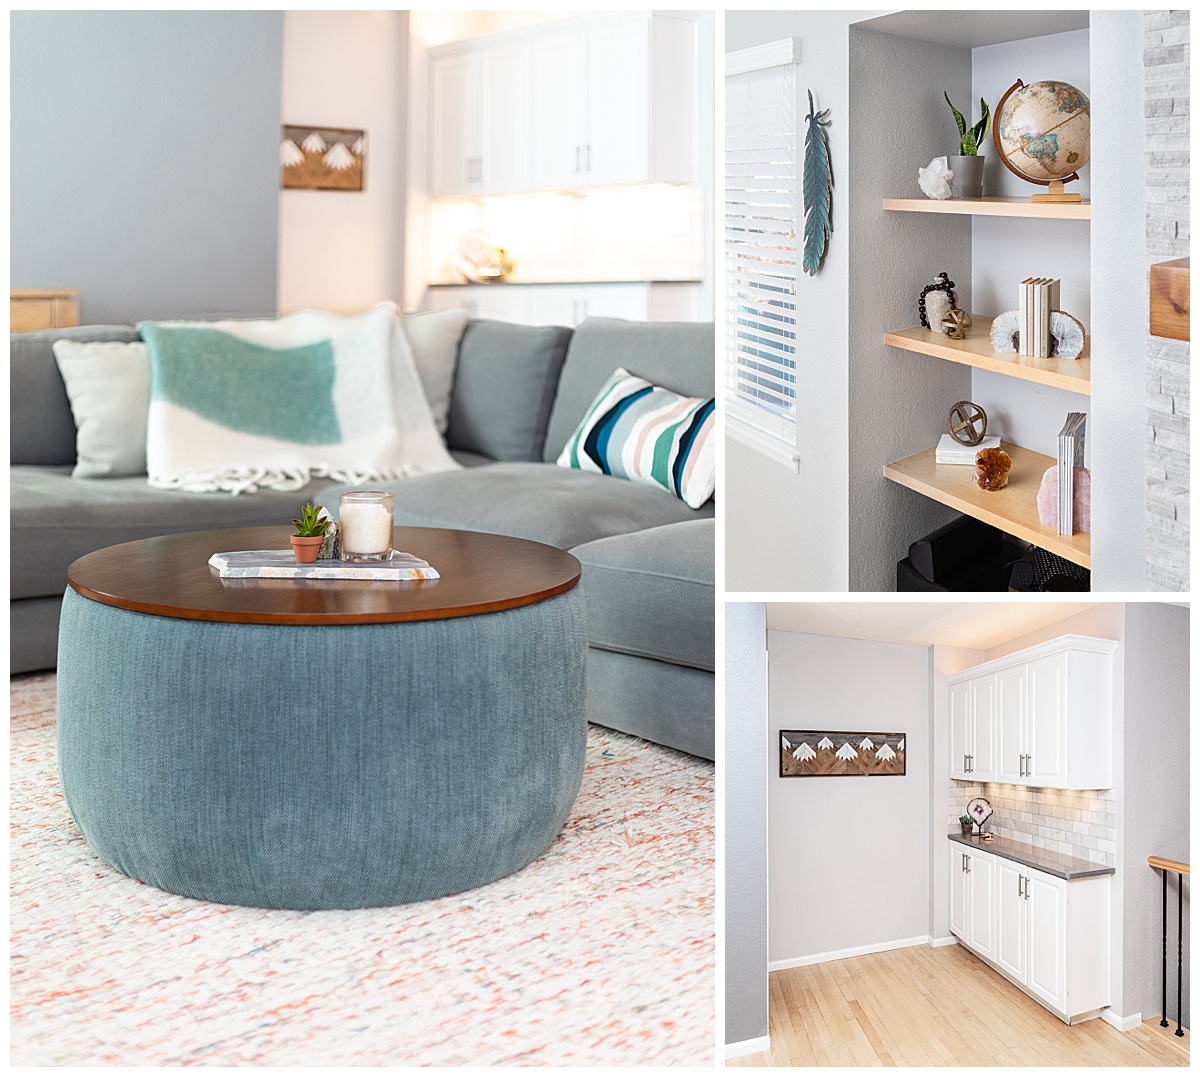 Close ups of interior design details. A teal fabric coffee table with a wooden top. A. built in shelving unit with knick knacks on it. A mini countertop area with white cabinets and white tile backsplash.